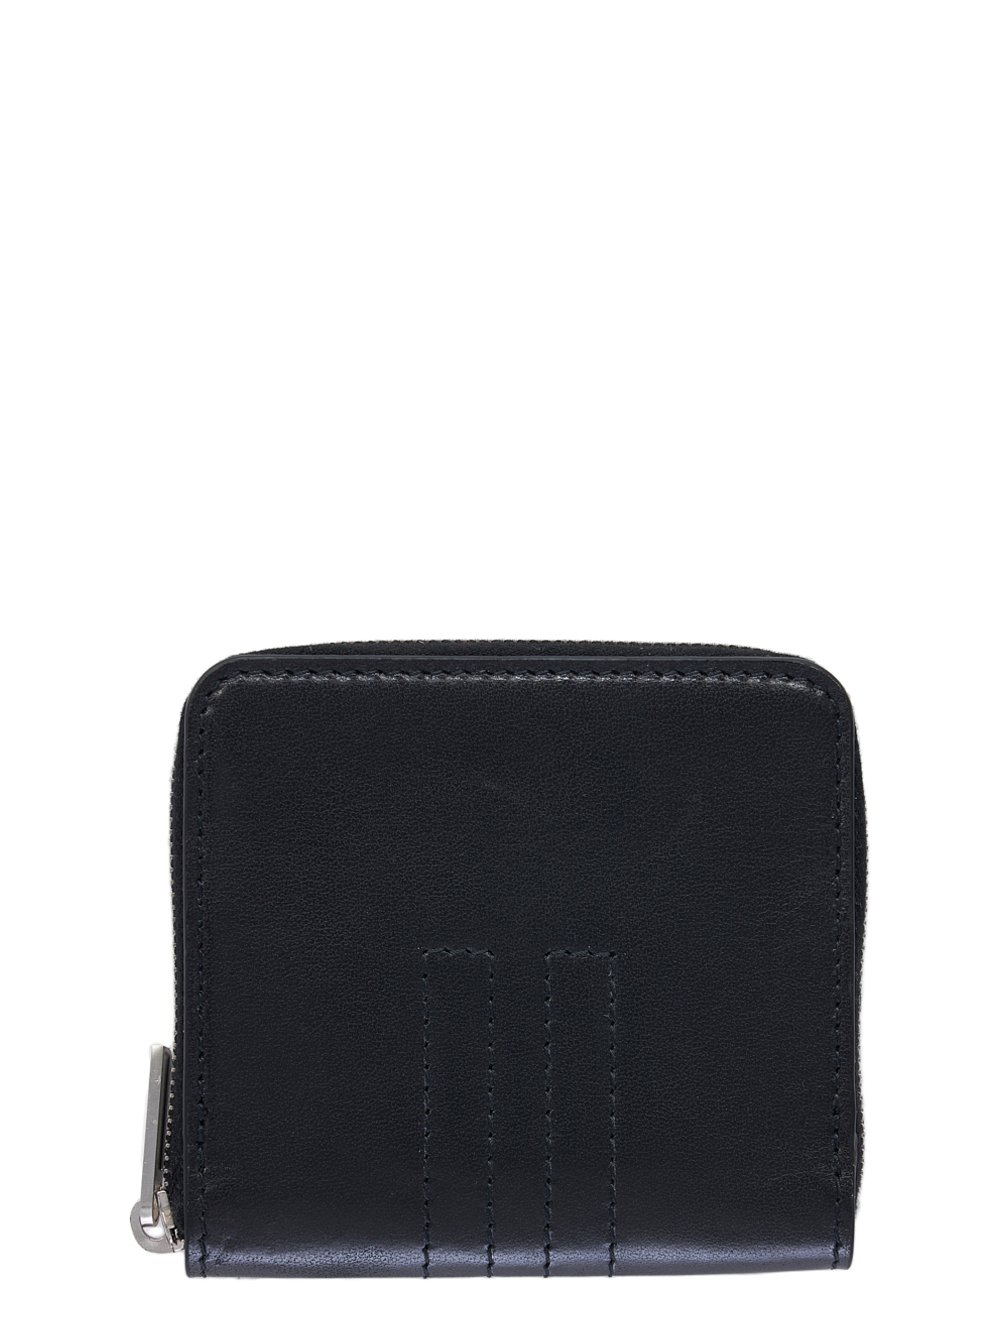 RICK OWENS FW23 LUXOR ZIPPED WALLET IN BLACK GLOSSY GROPONE COW LEATHER